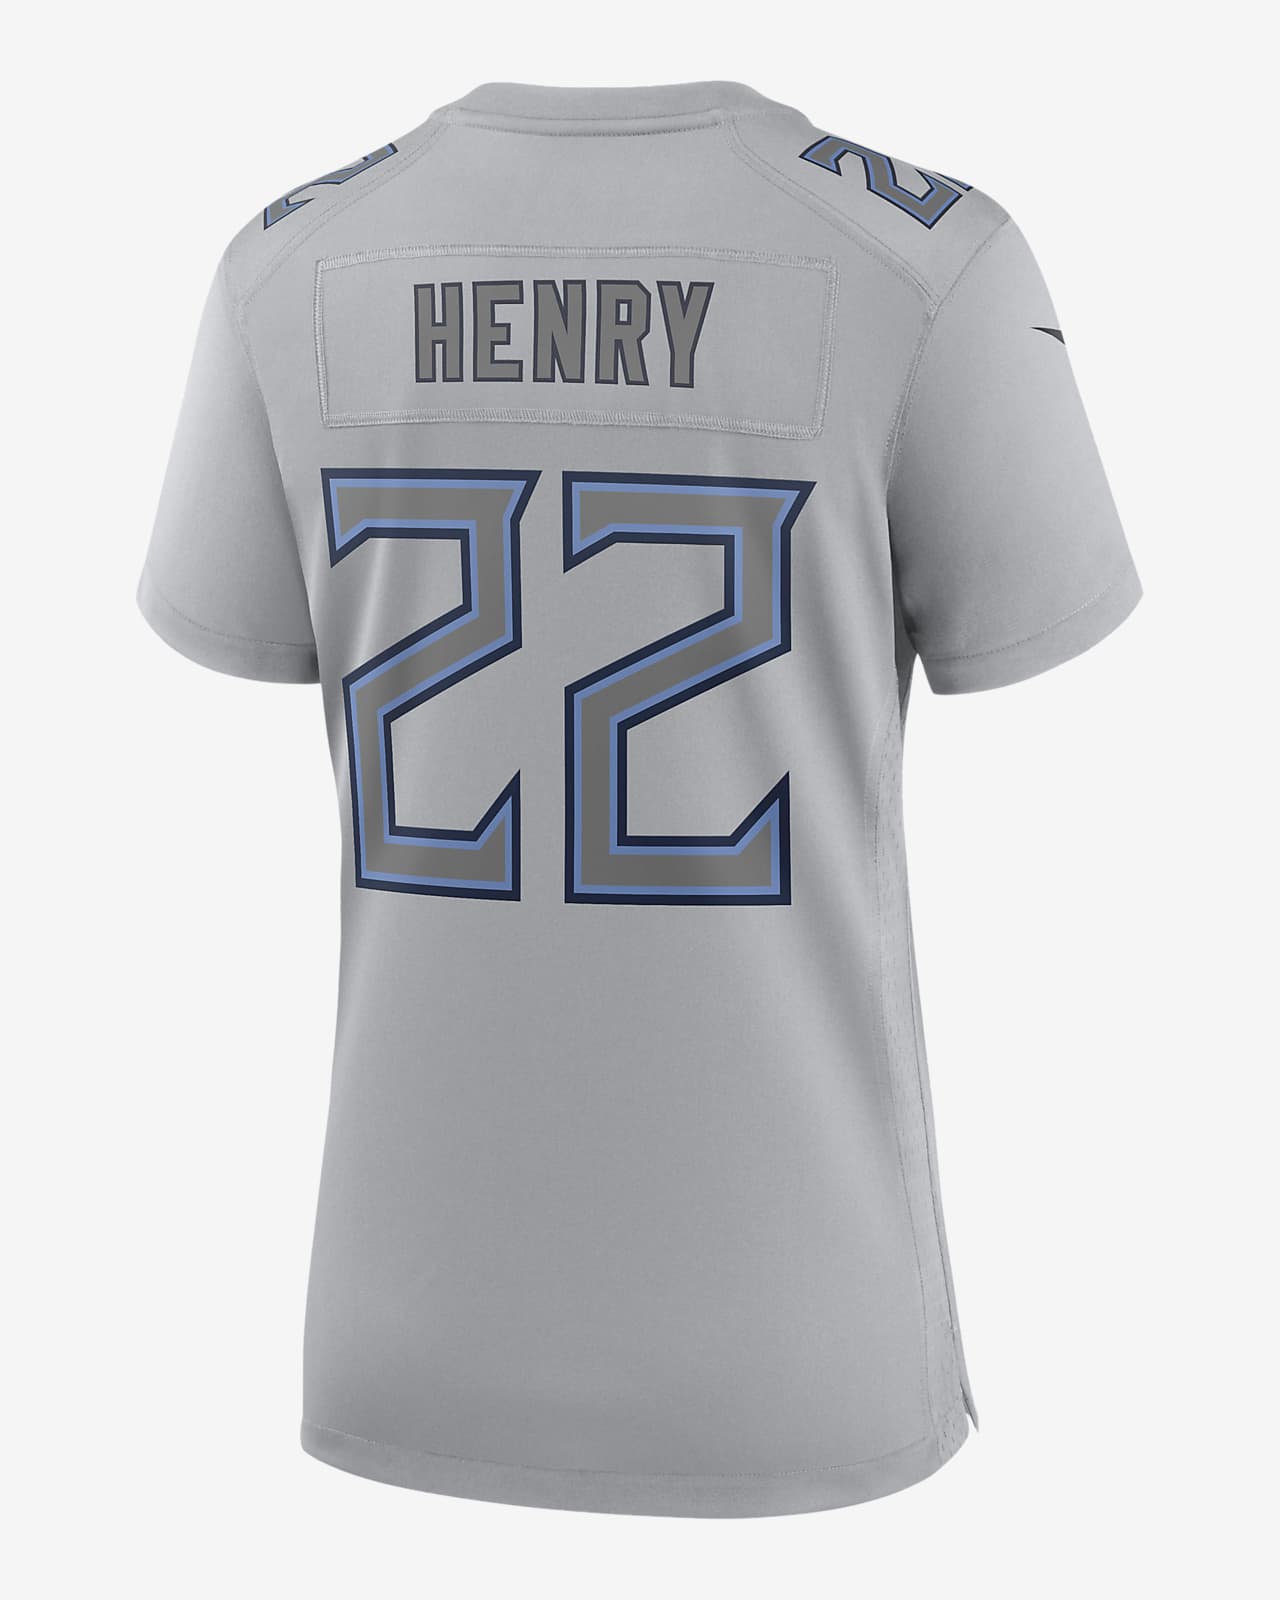 NFL Tennessee Titans Atmosphere (Derrick Henry) Women's Fashion Football  Jersey